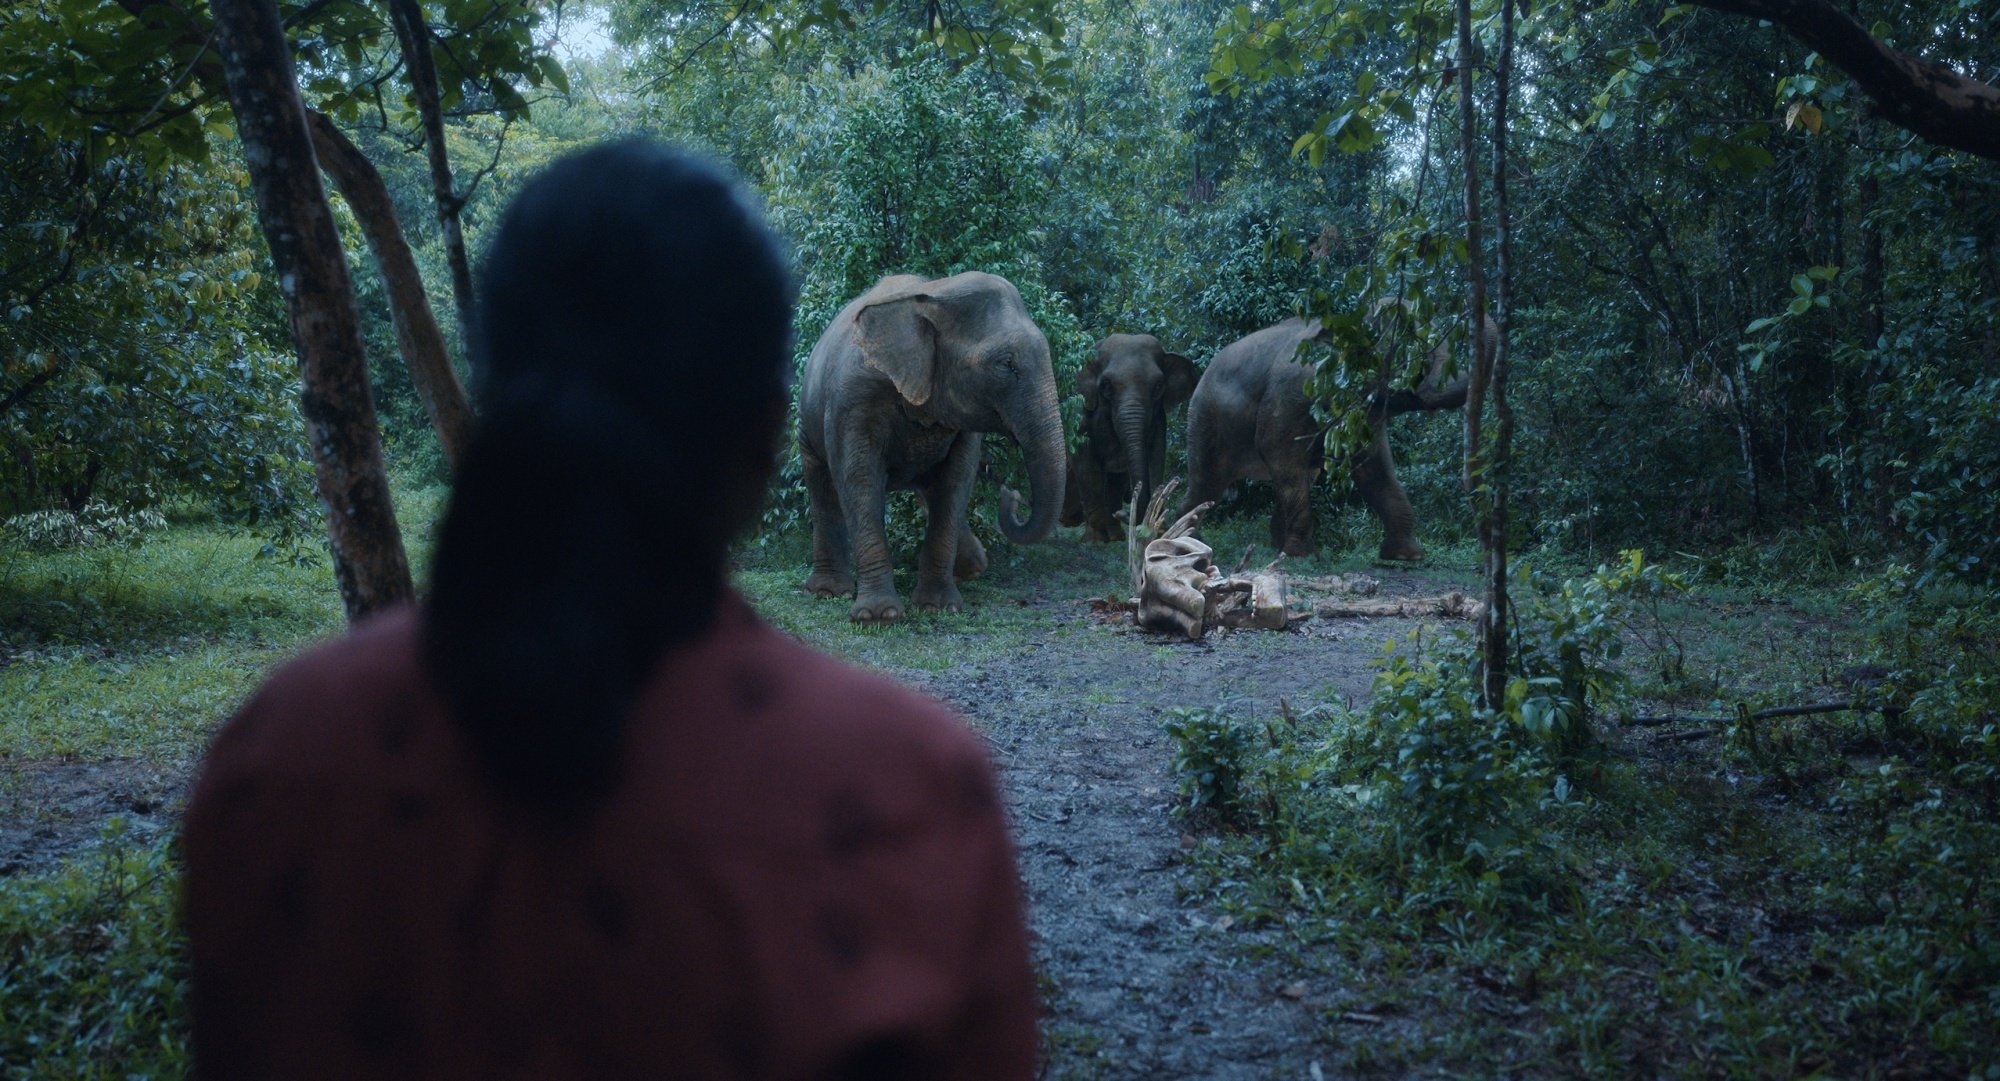 A woman overlooks a group of elephants in a forest in South India.